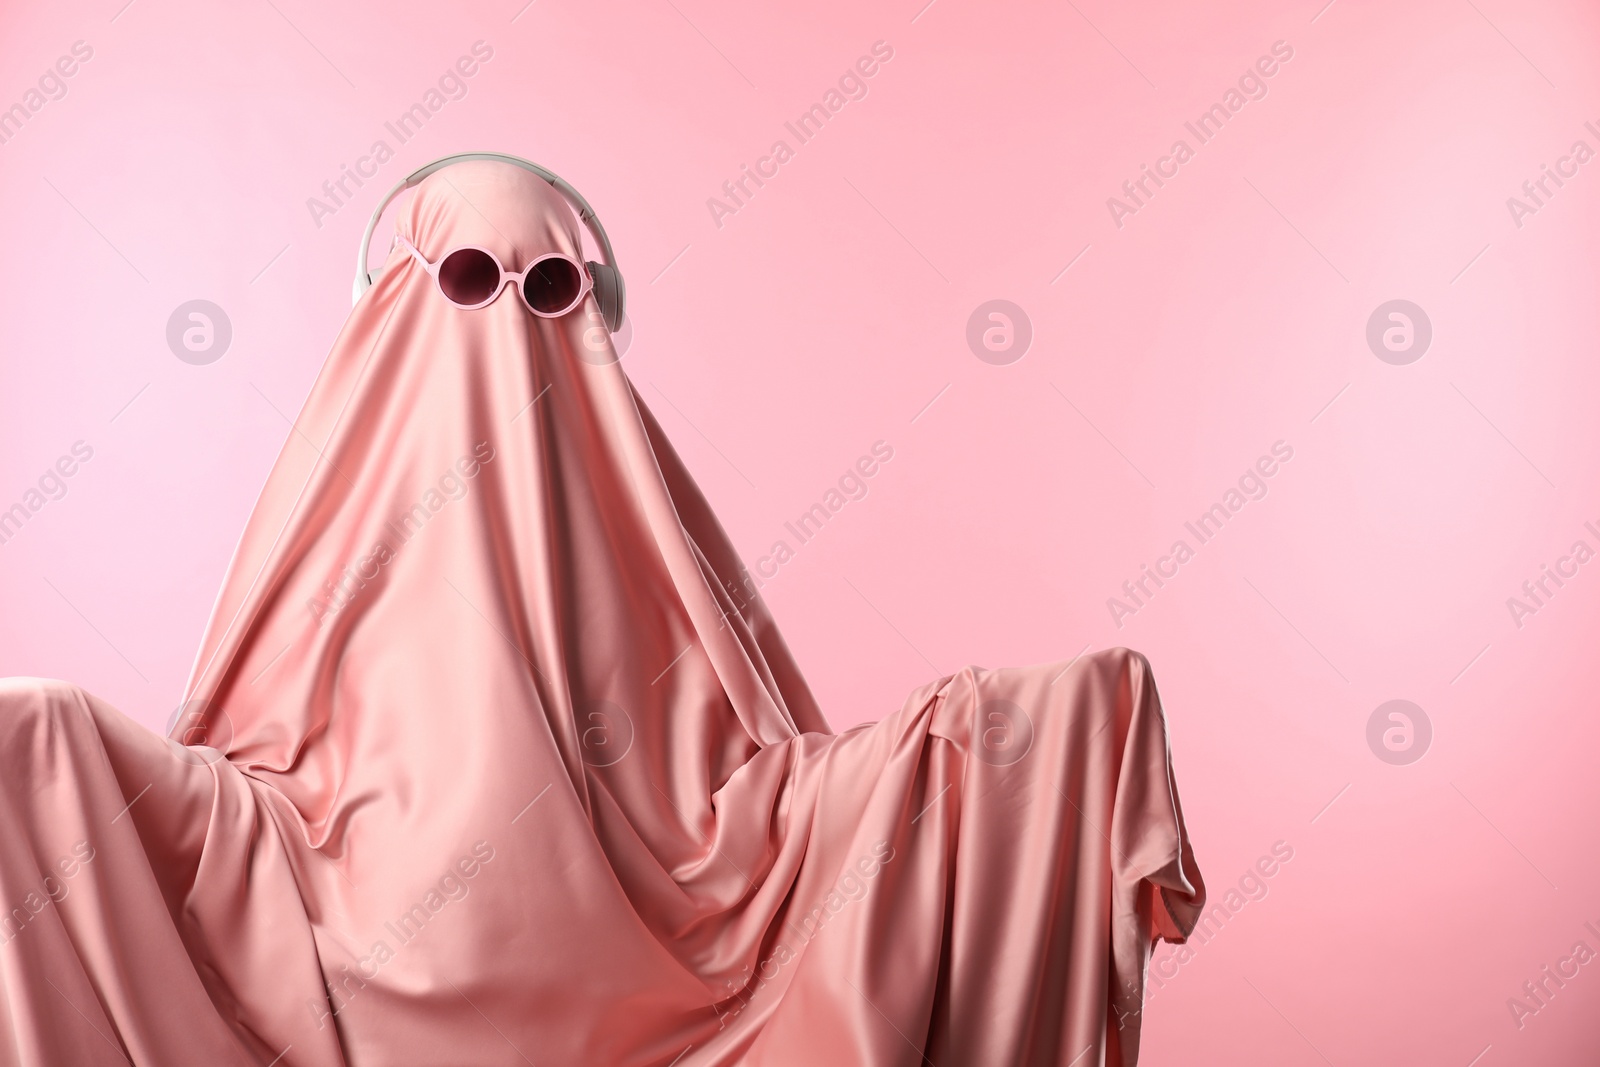 Photo of Glamorous ghost. Woman in sheet with sunglasses and headphones on pink background, space for text